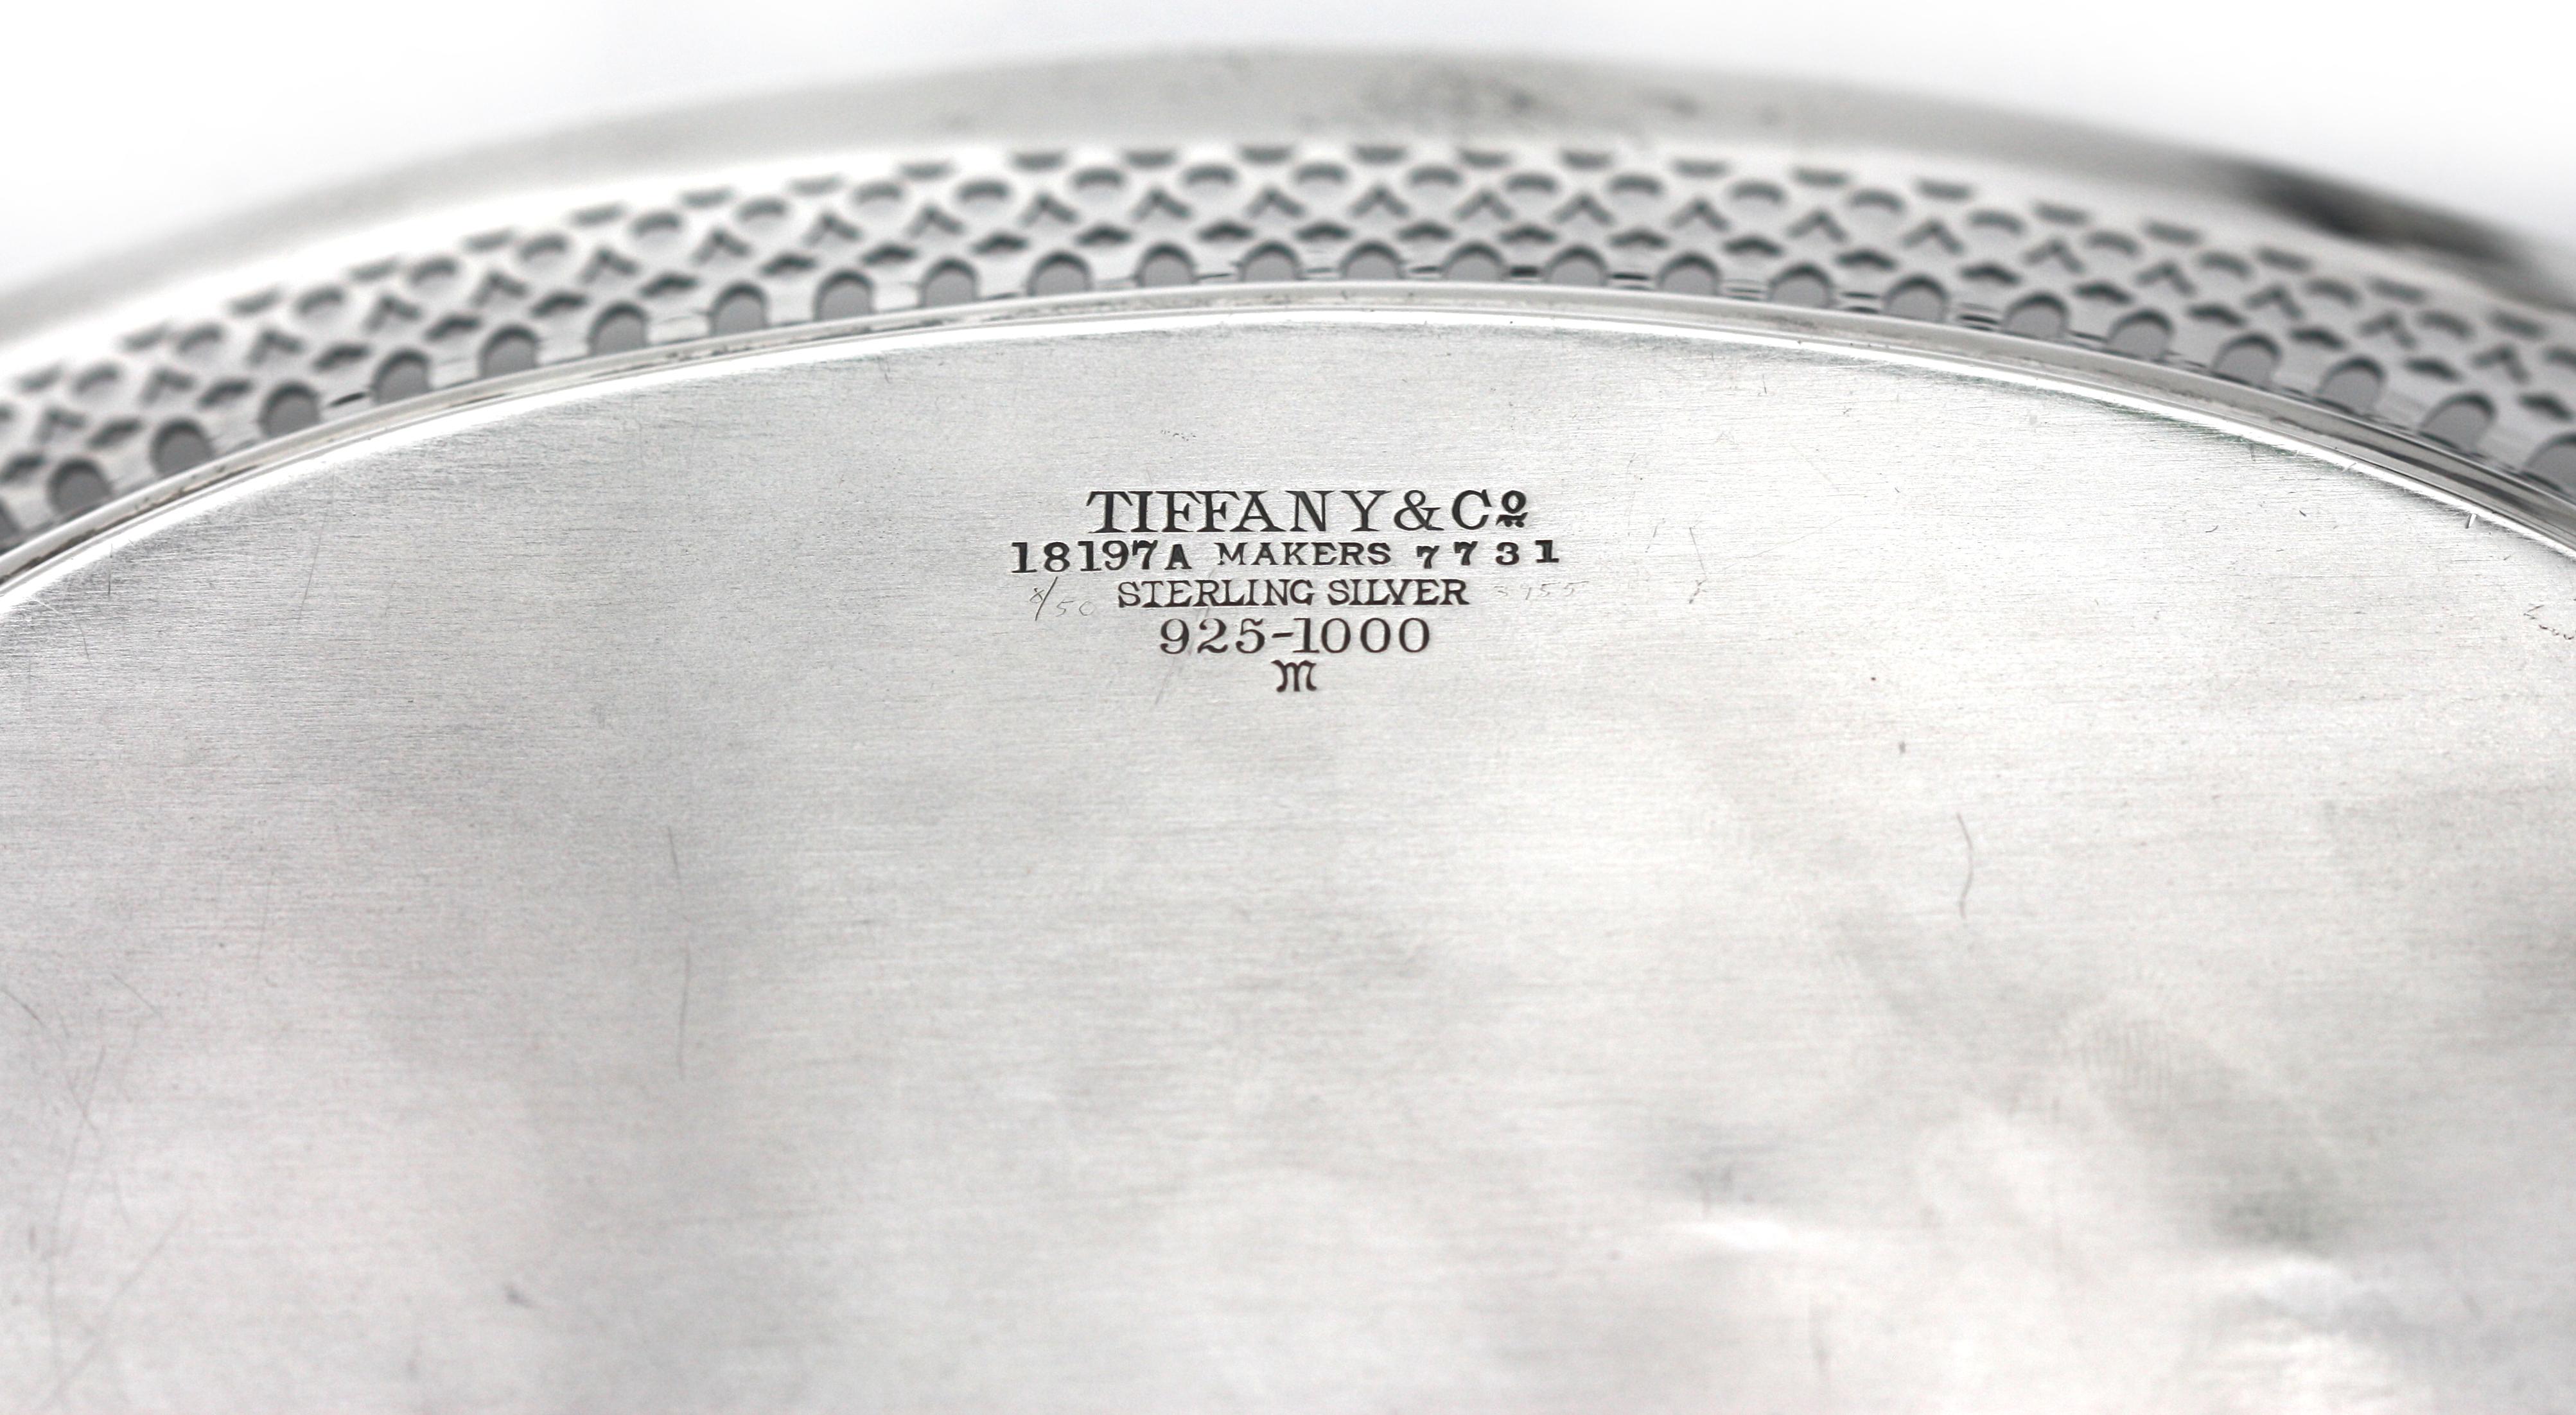 
Tiffany & Co. Sterling Silver Bread Tray.
Circa 1915, marked. Oval with a reticulated lattice and bead border, inscribed Hilda Robinson Smith, April 16th, 1914.
Height 2.5 in., Length 10.5 in., 8.47 troy oz.
